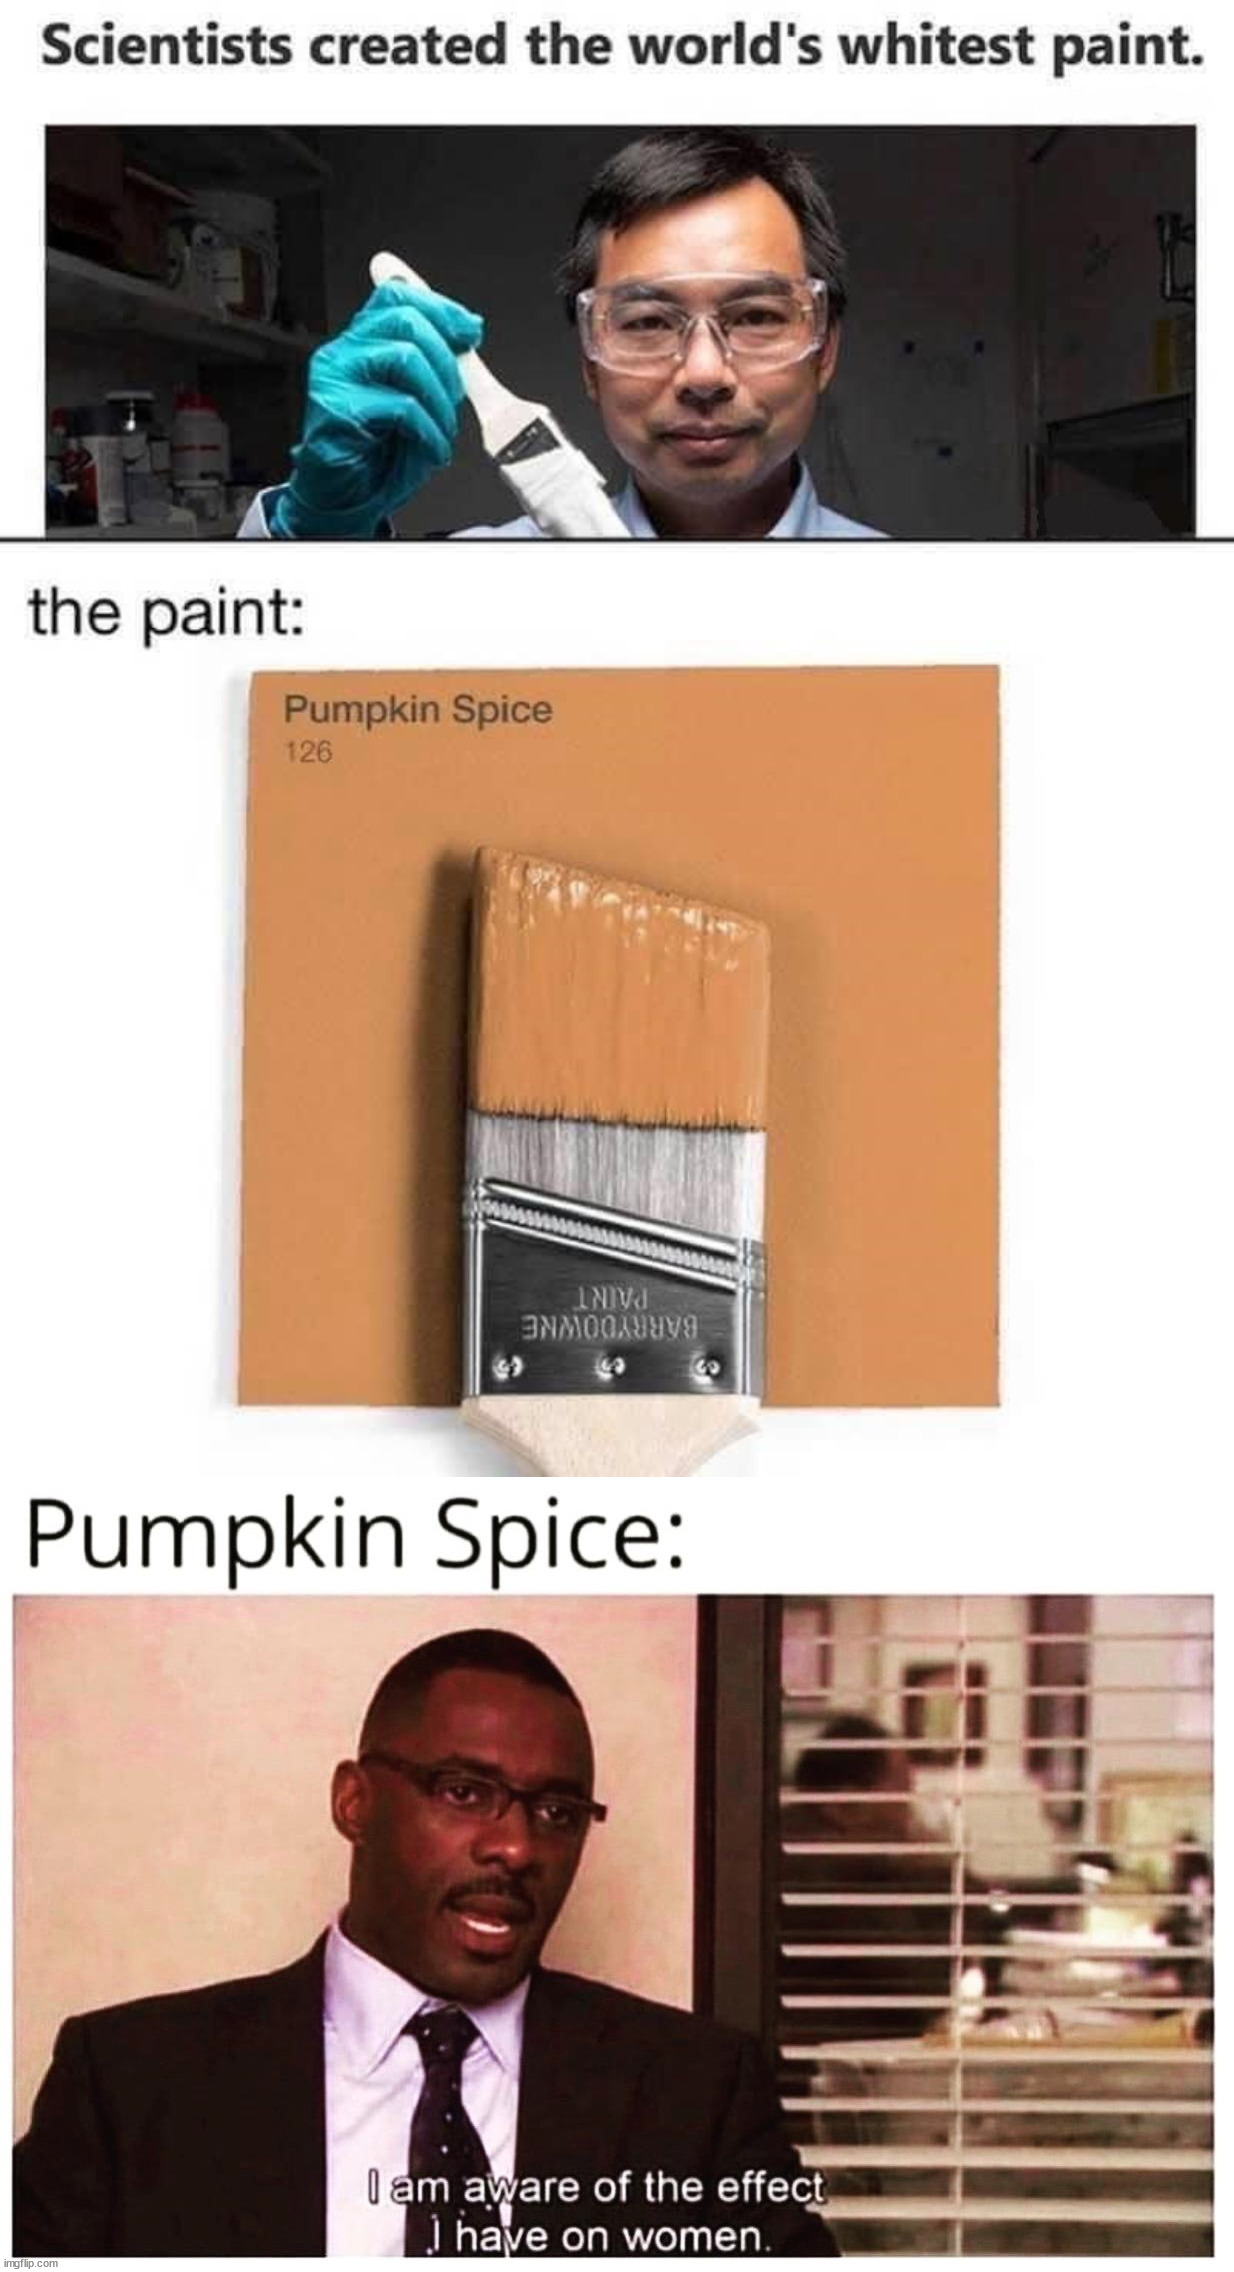 I think this just might be true | image tagged in pumpkin spice,white people,white,science | made w/ Imgflip meme maker